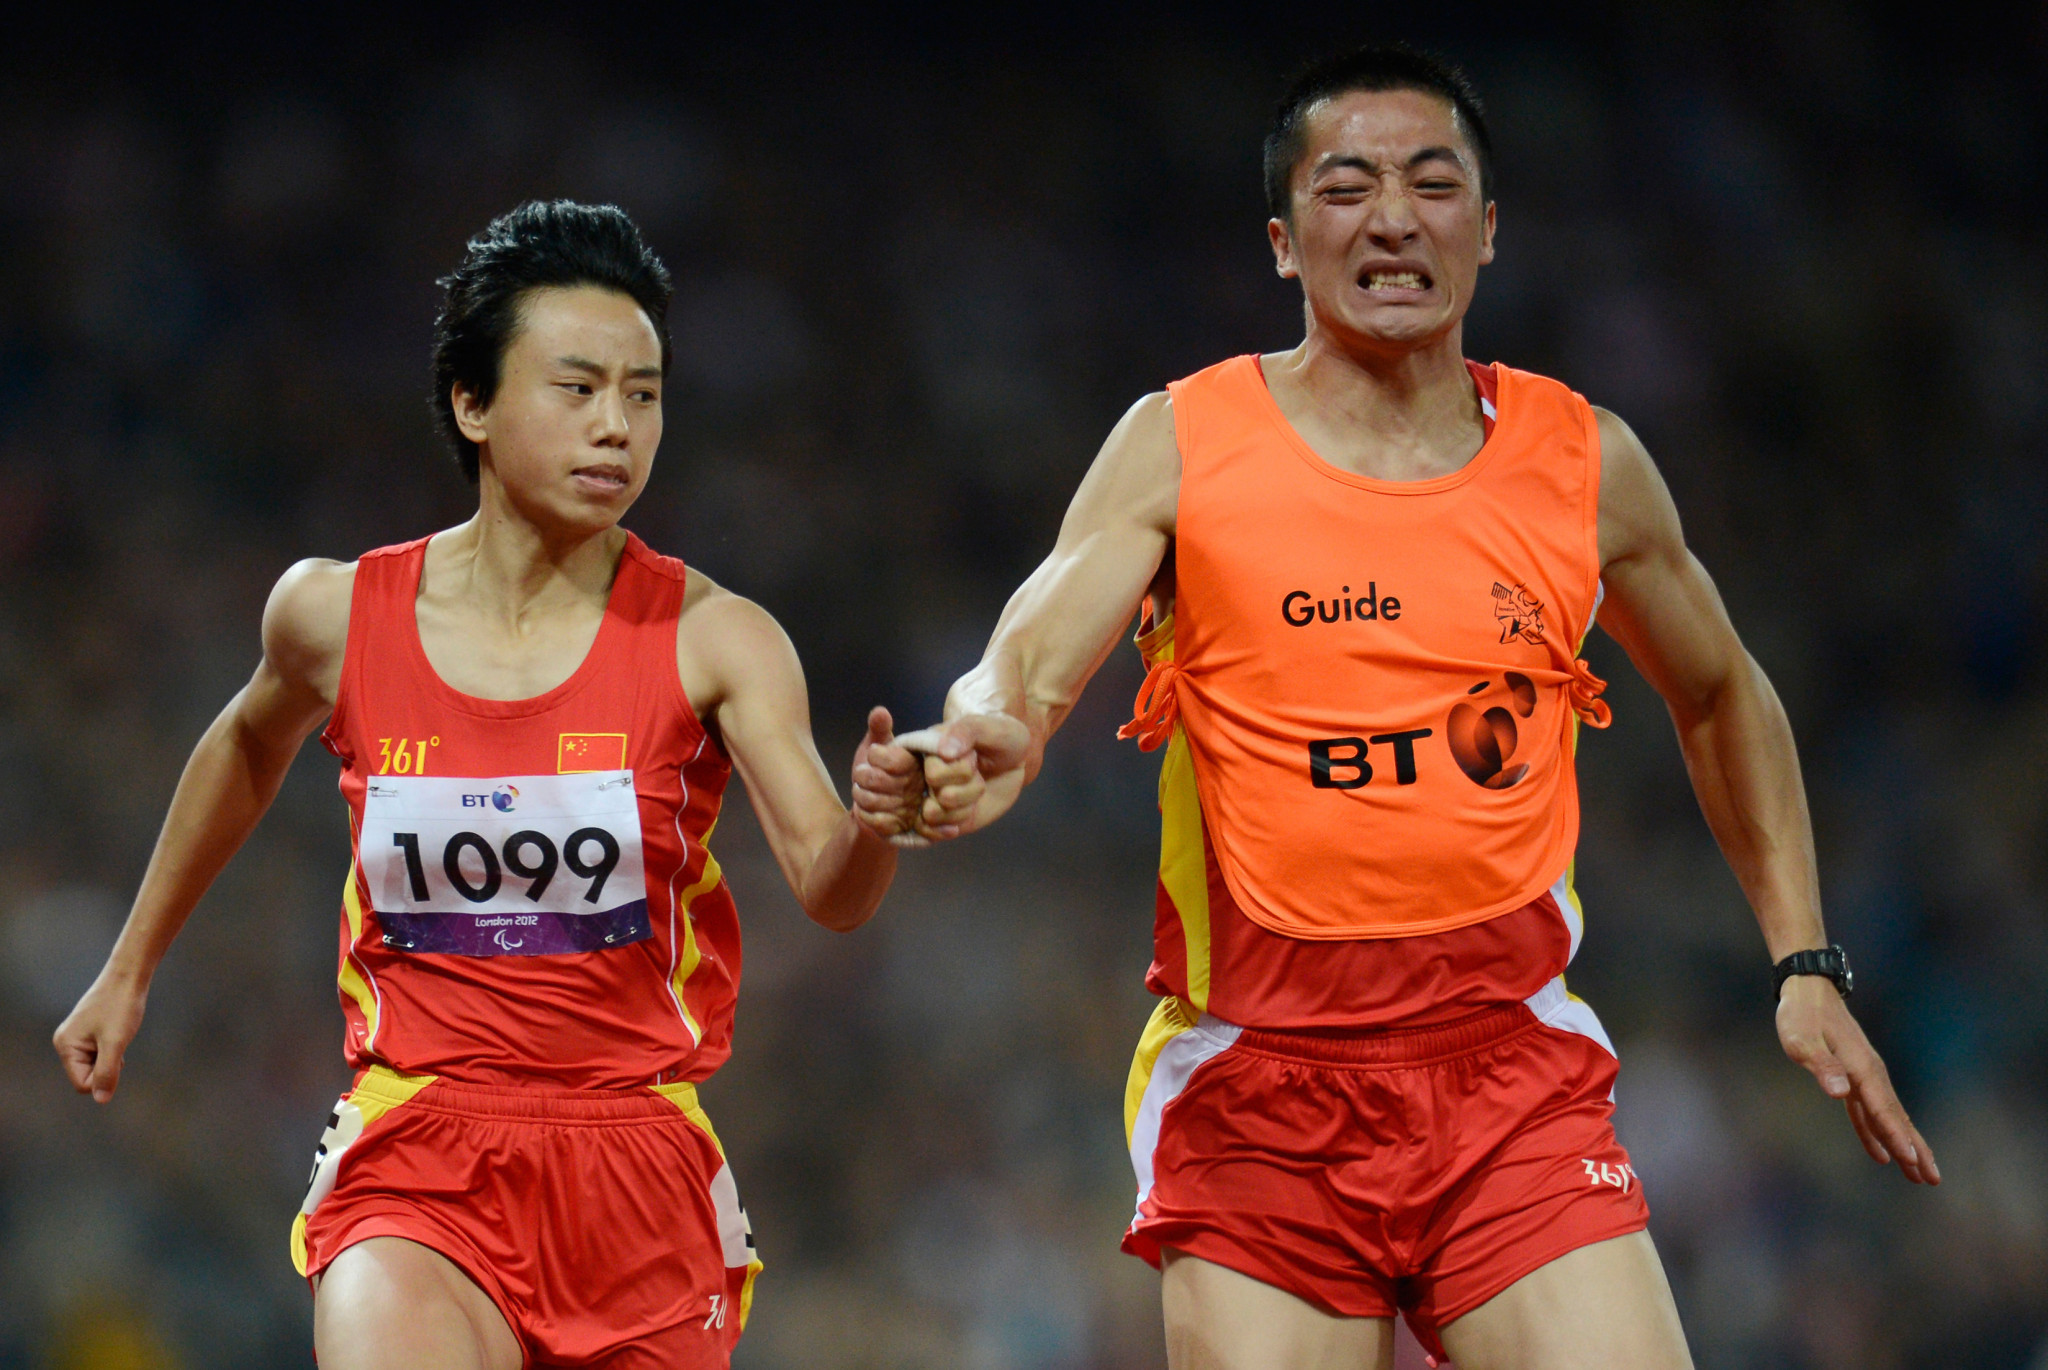 Double Paralympic sprint gold medallist Zhou Guohua recorded a world leading attempt in the long jump ©Getty Images